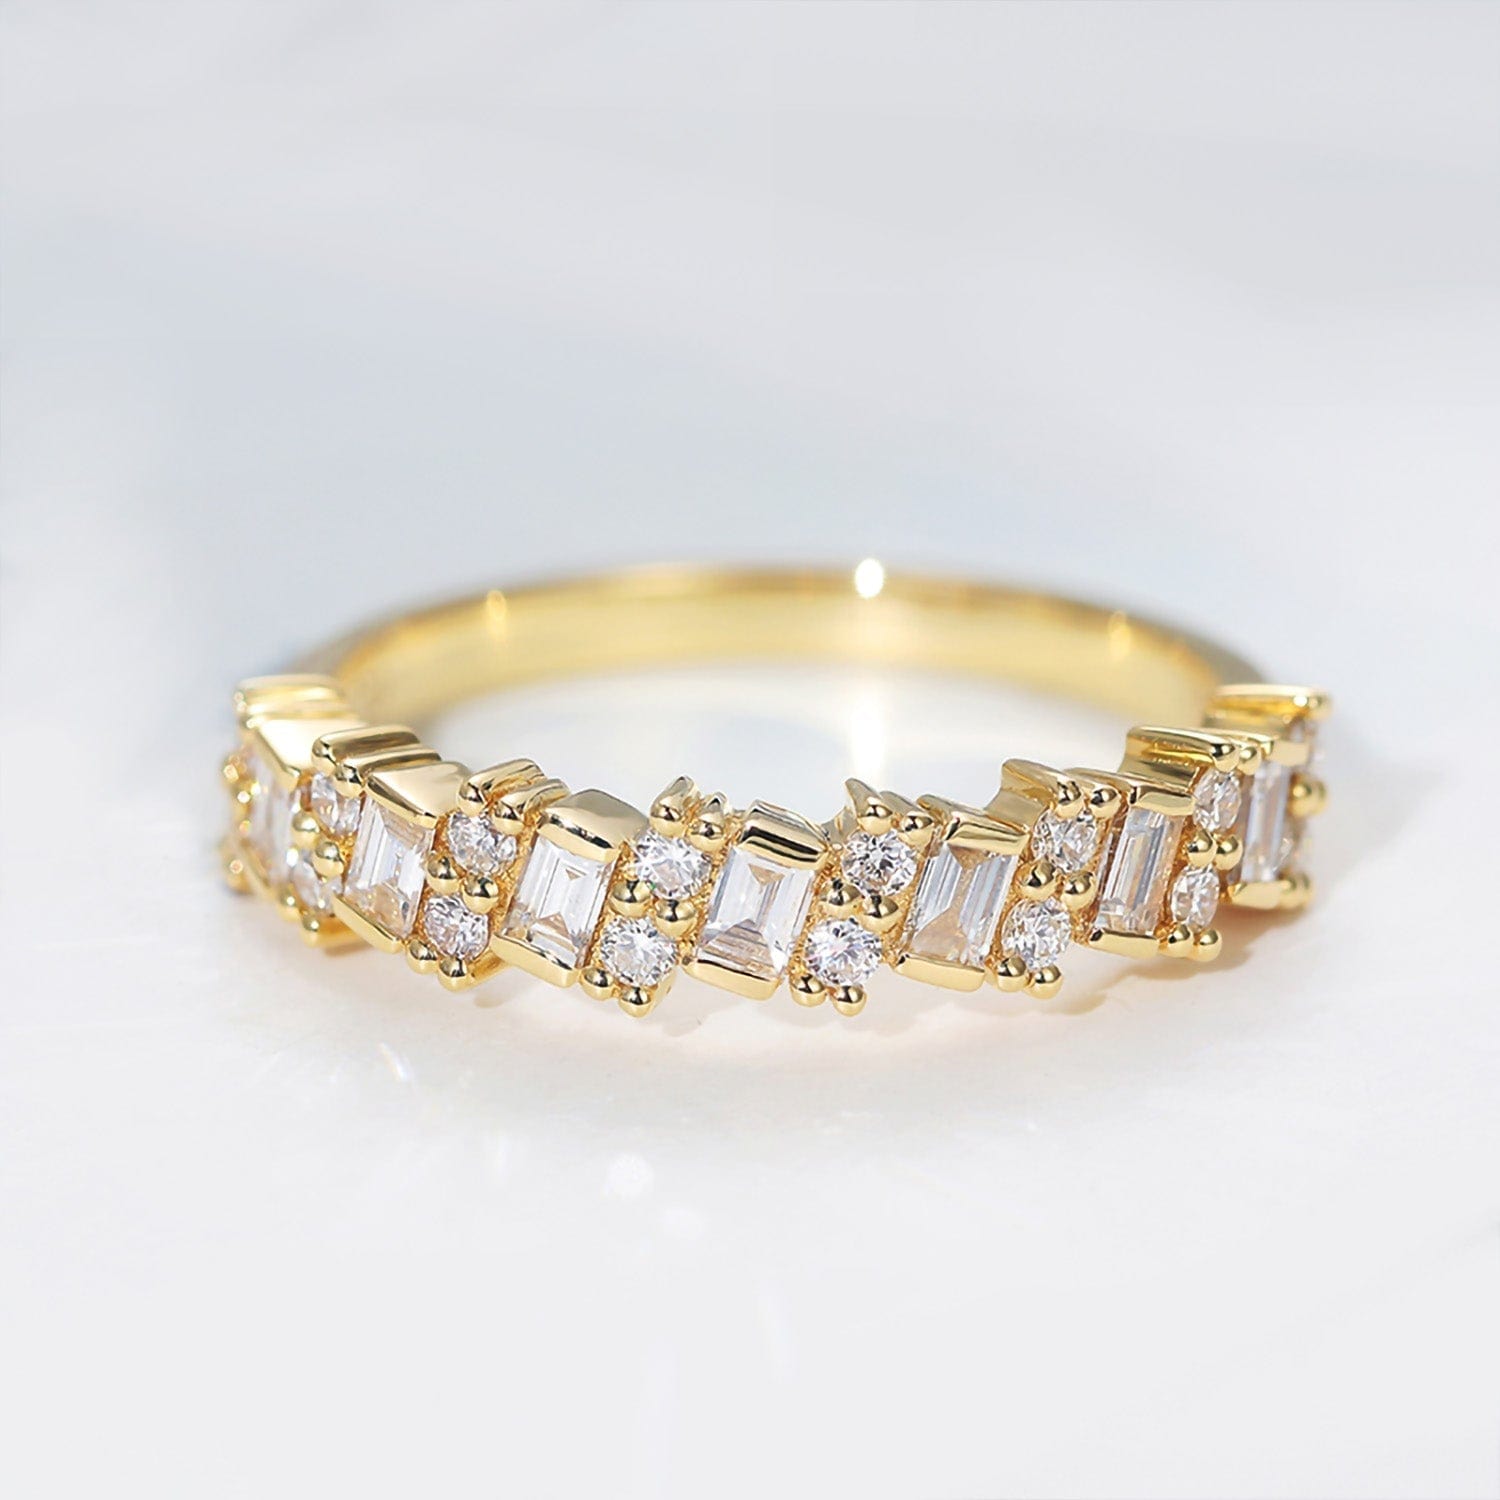 Alternating Baguette Cut and Round Diamond Eternity Band